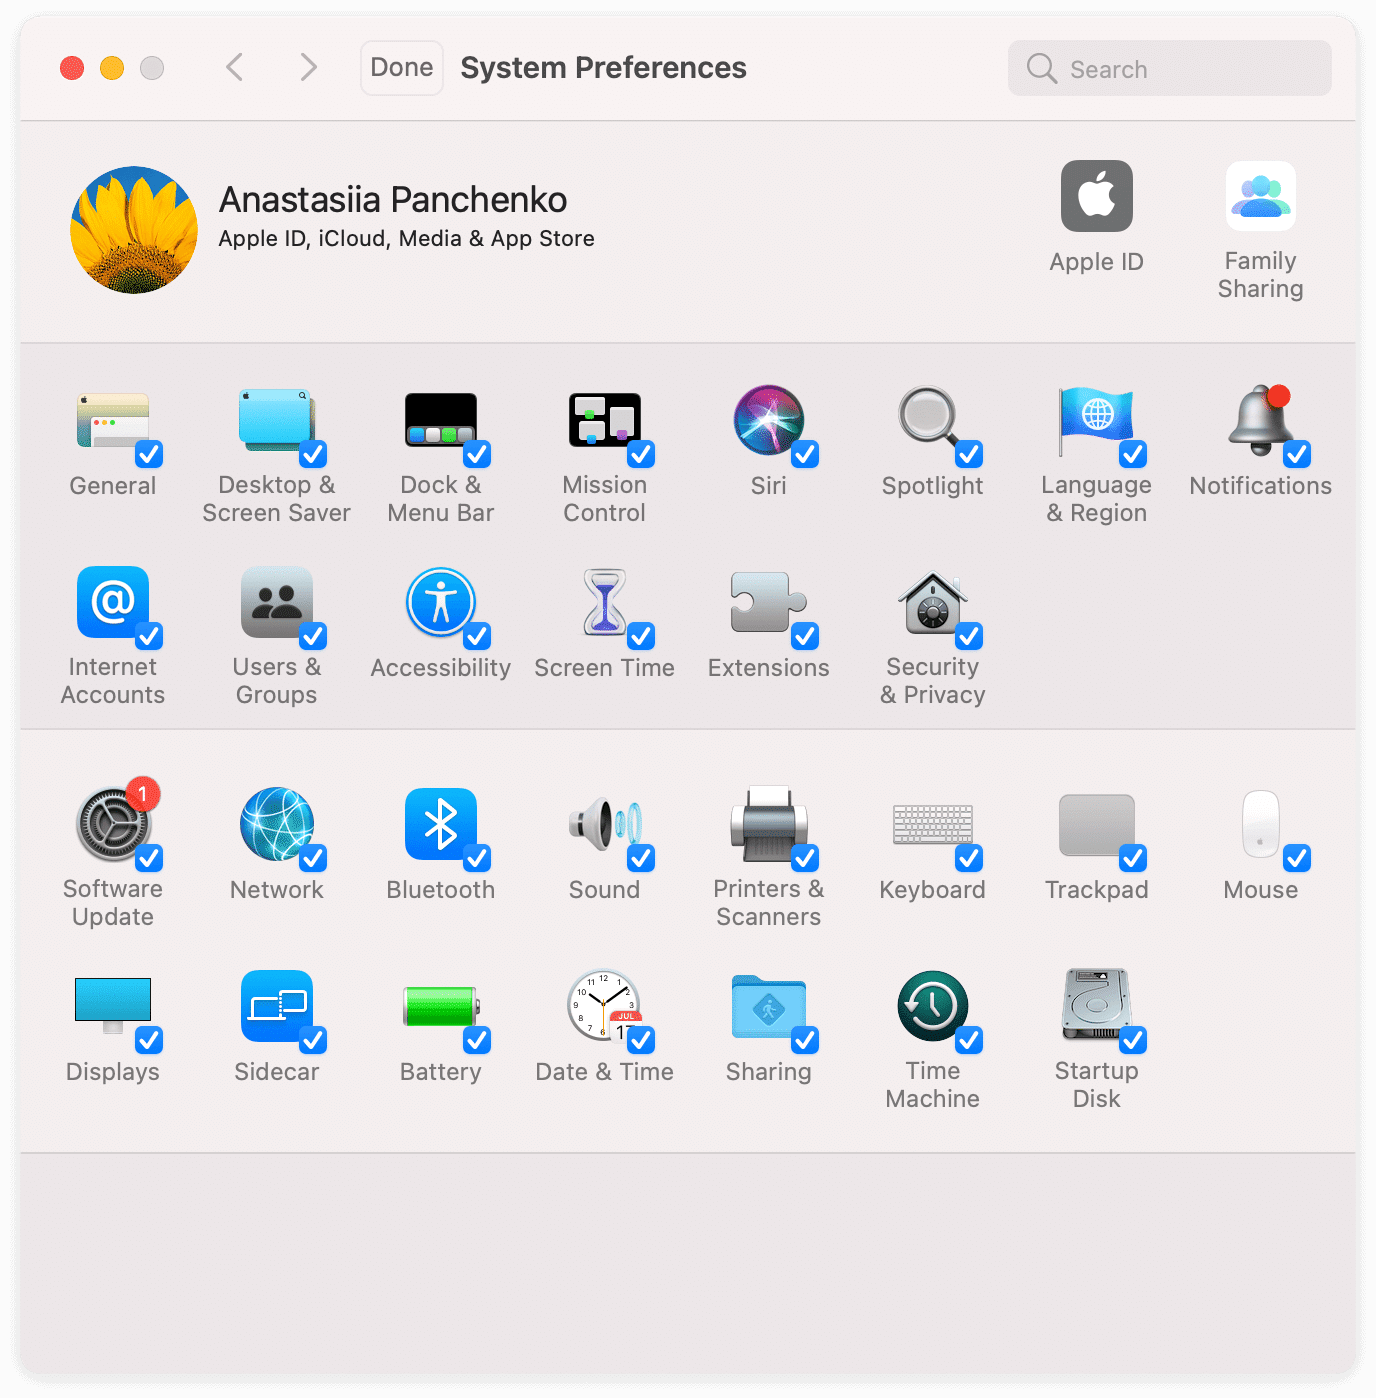 System preferences showing categories